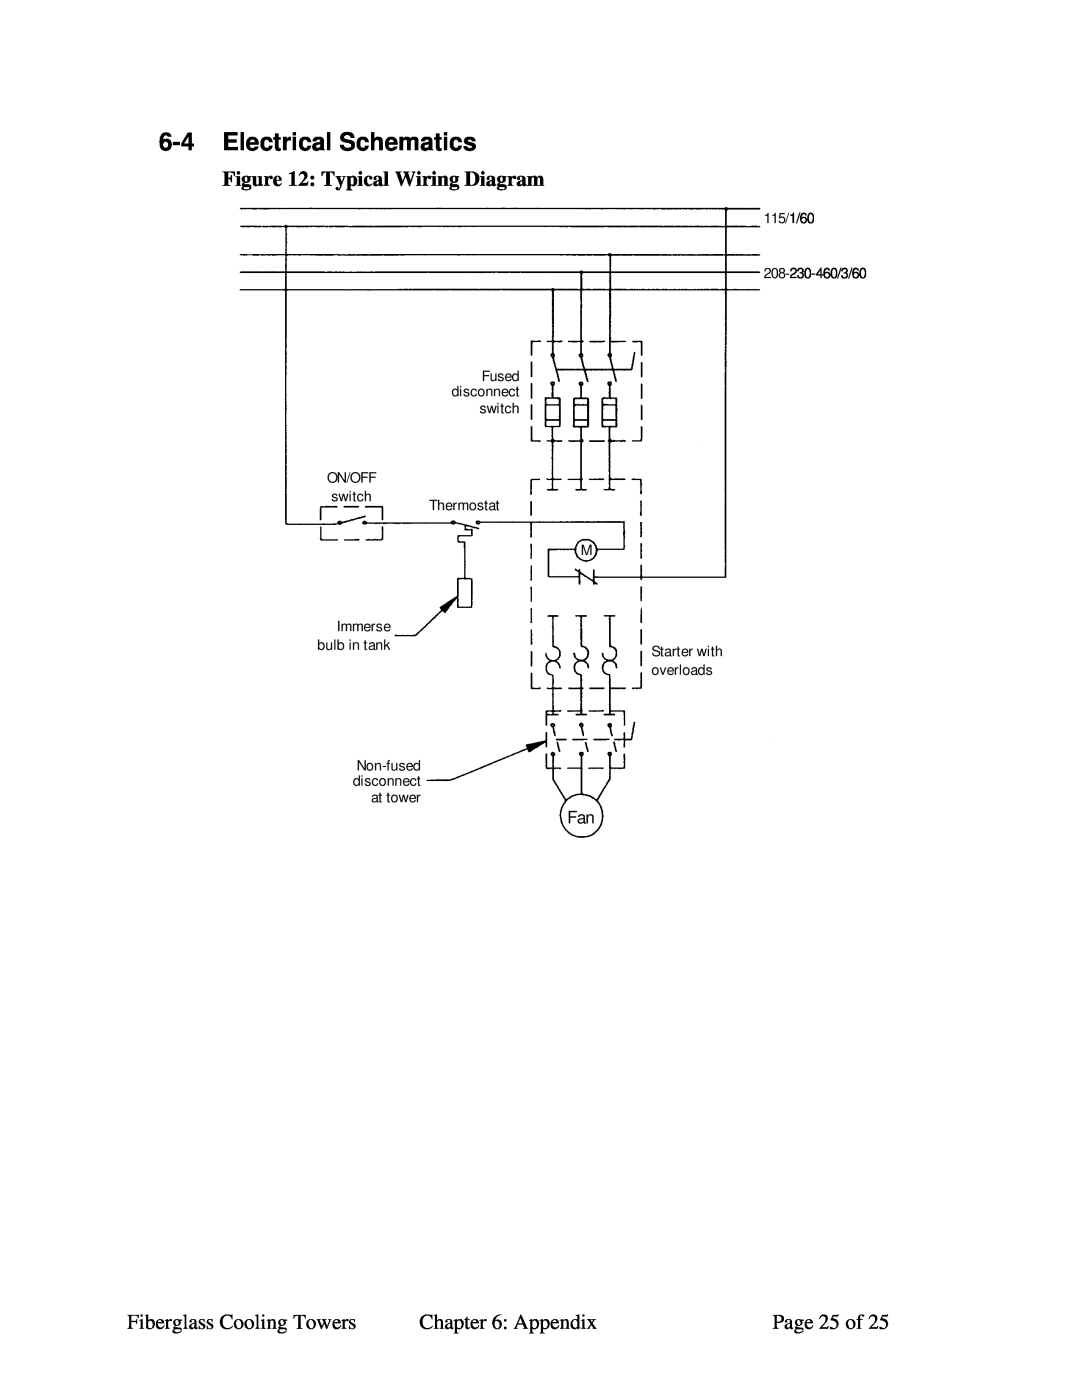 Sterling 882.004400.00 6-4Electrical Schematics, ON/OFF switch Immerse bulb in tank, Non-fuseddisconnect at tower 